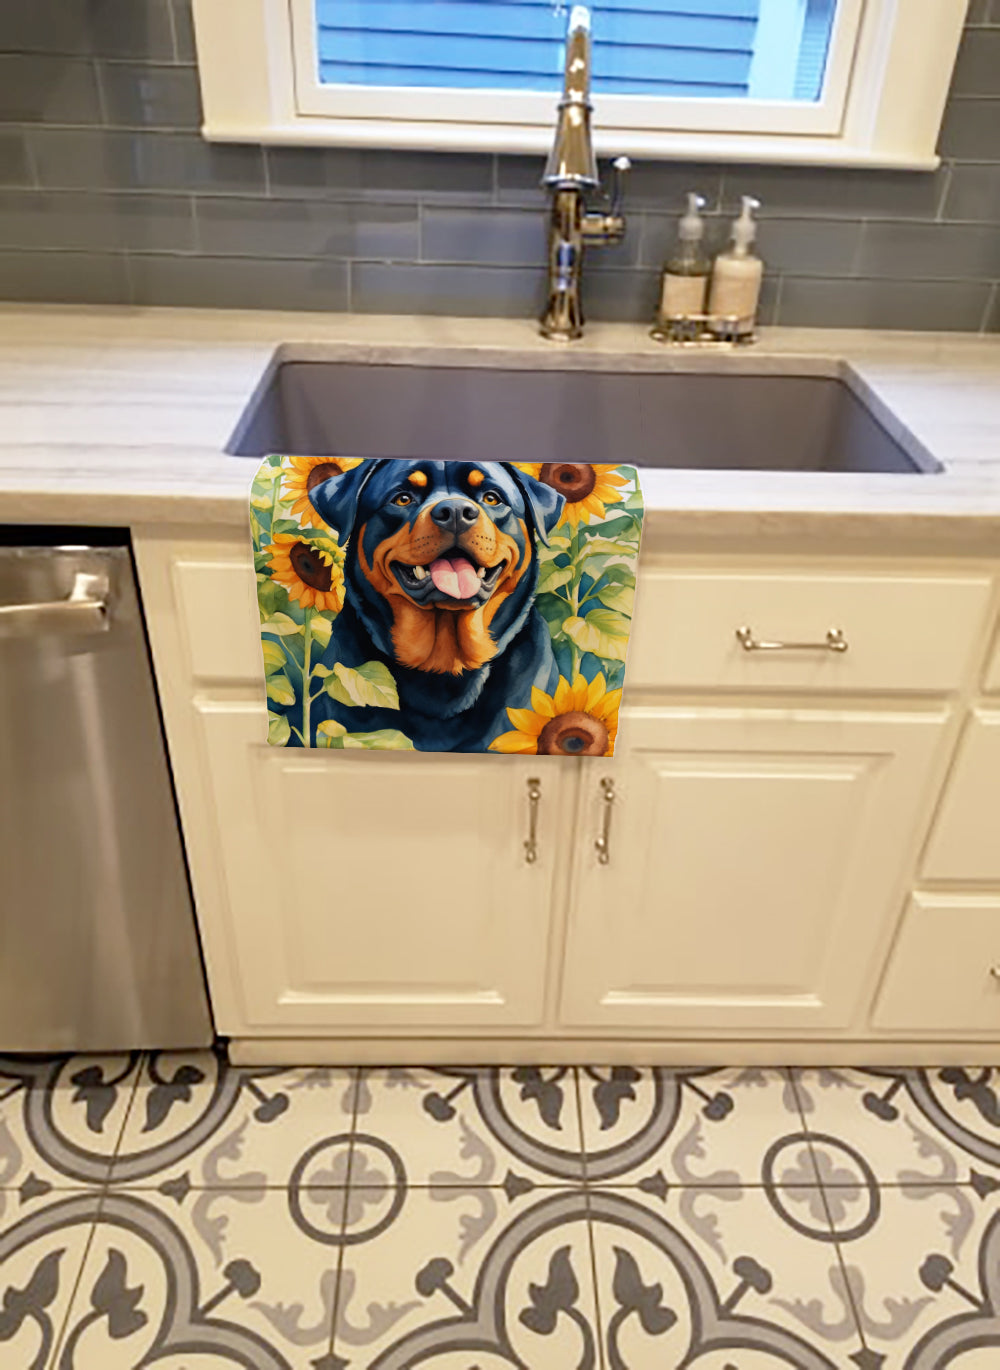 Buy this Rottweiler in Sunflowers Kitchen Towel